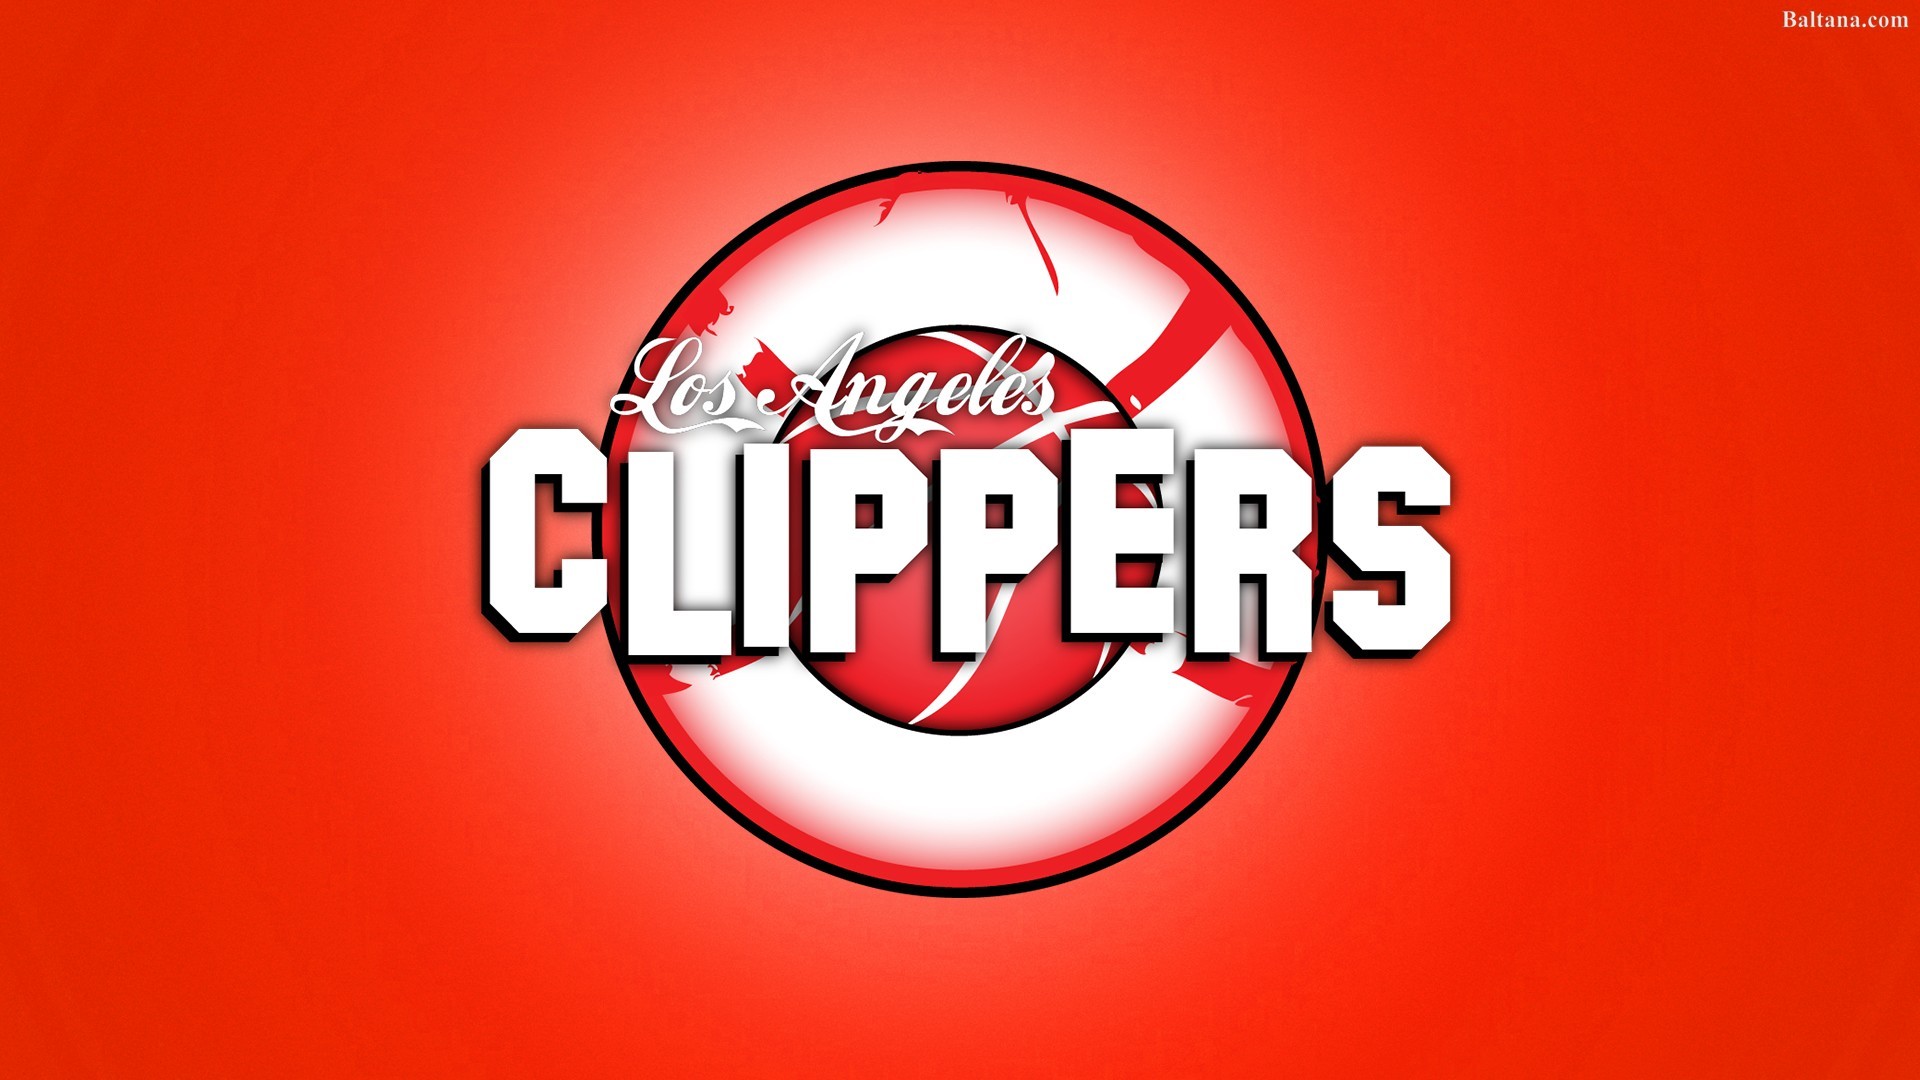 1920x1080 Los Angeles Clippers Background Wallpaper 33507